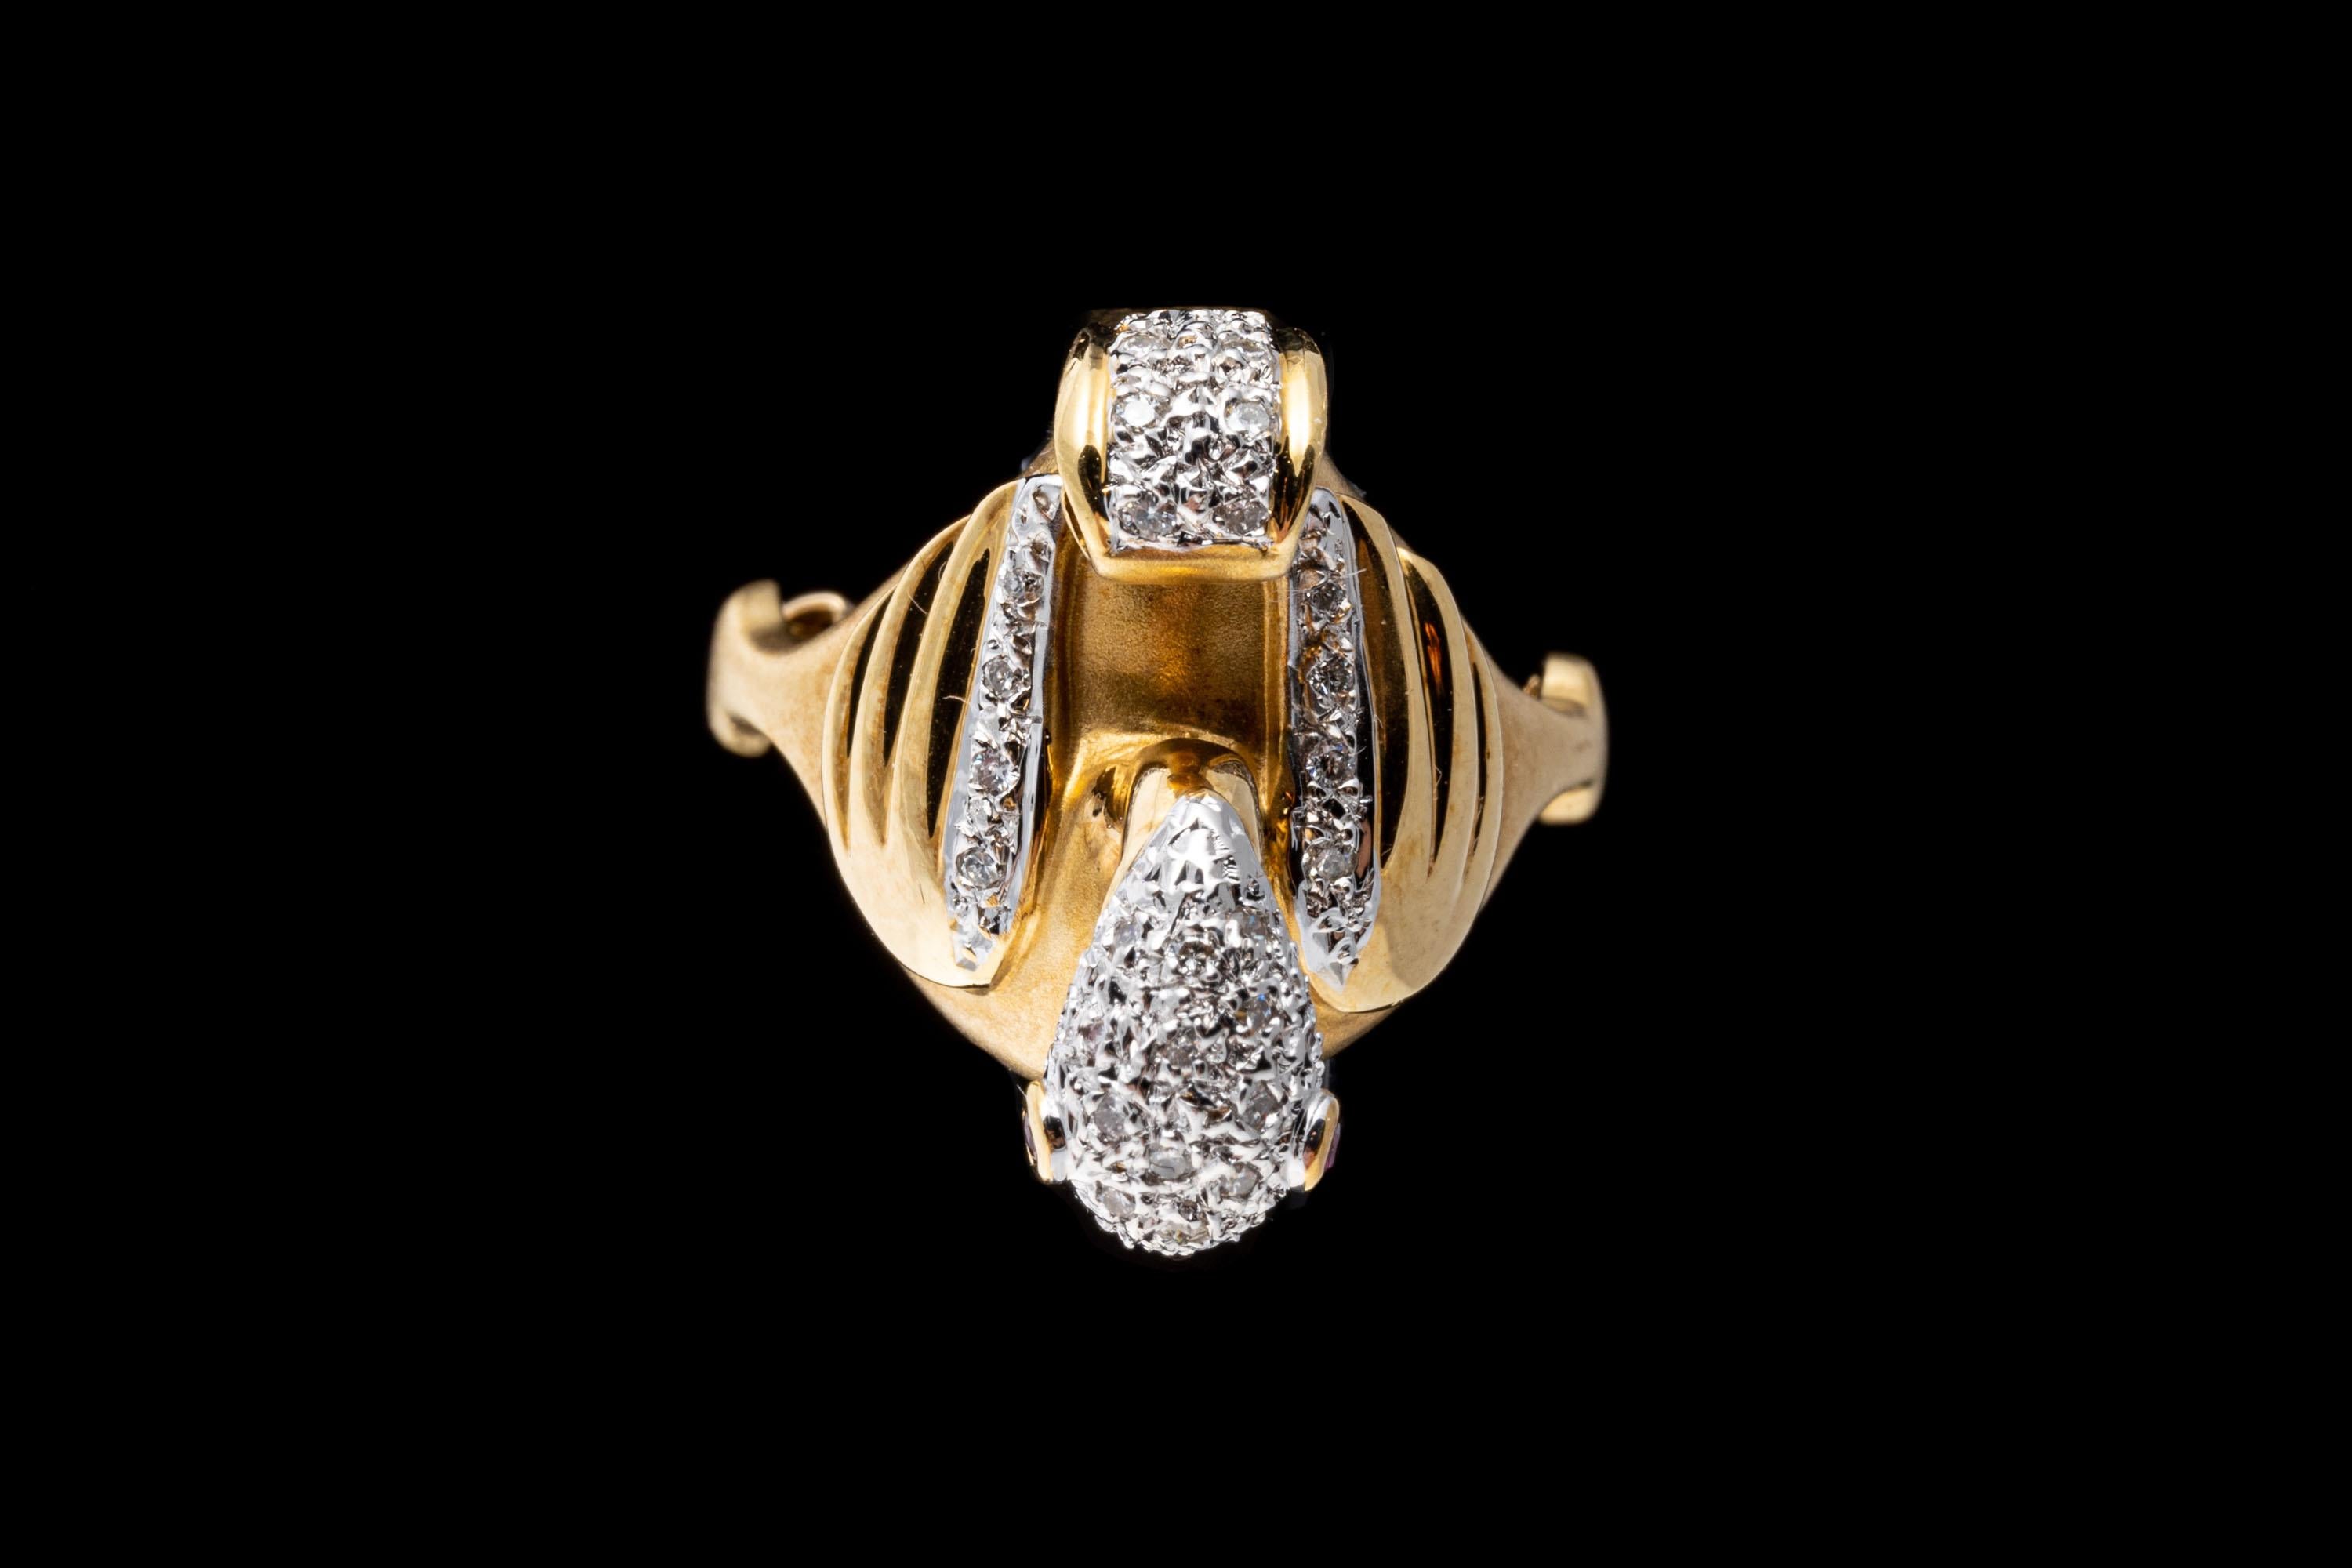 18k yellow gold ring. This playful ring is a figural flamingo, decorated with high polished wings, adorned with round faceted diamond trim, with a pave diamond head and tail, embellished with round faceted ruby eyes, approximately 0.02 TCW. The